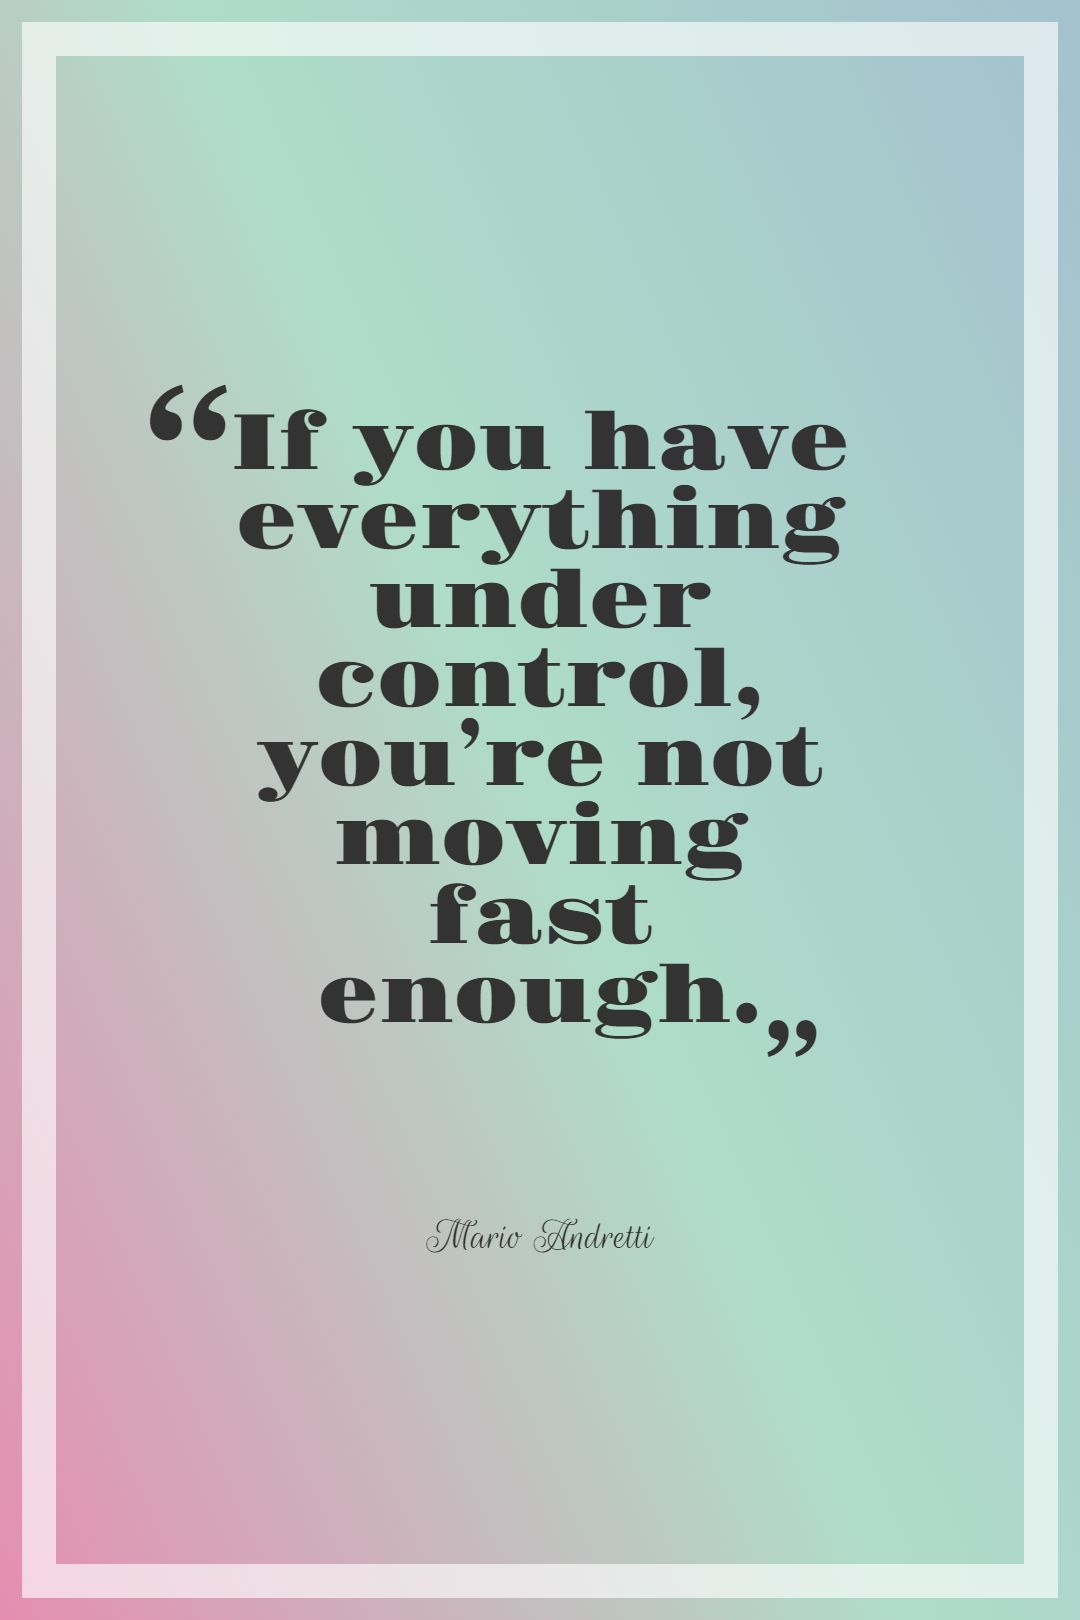 If you have everything under control you’re not moving fast enough.